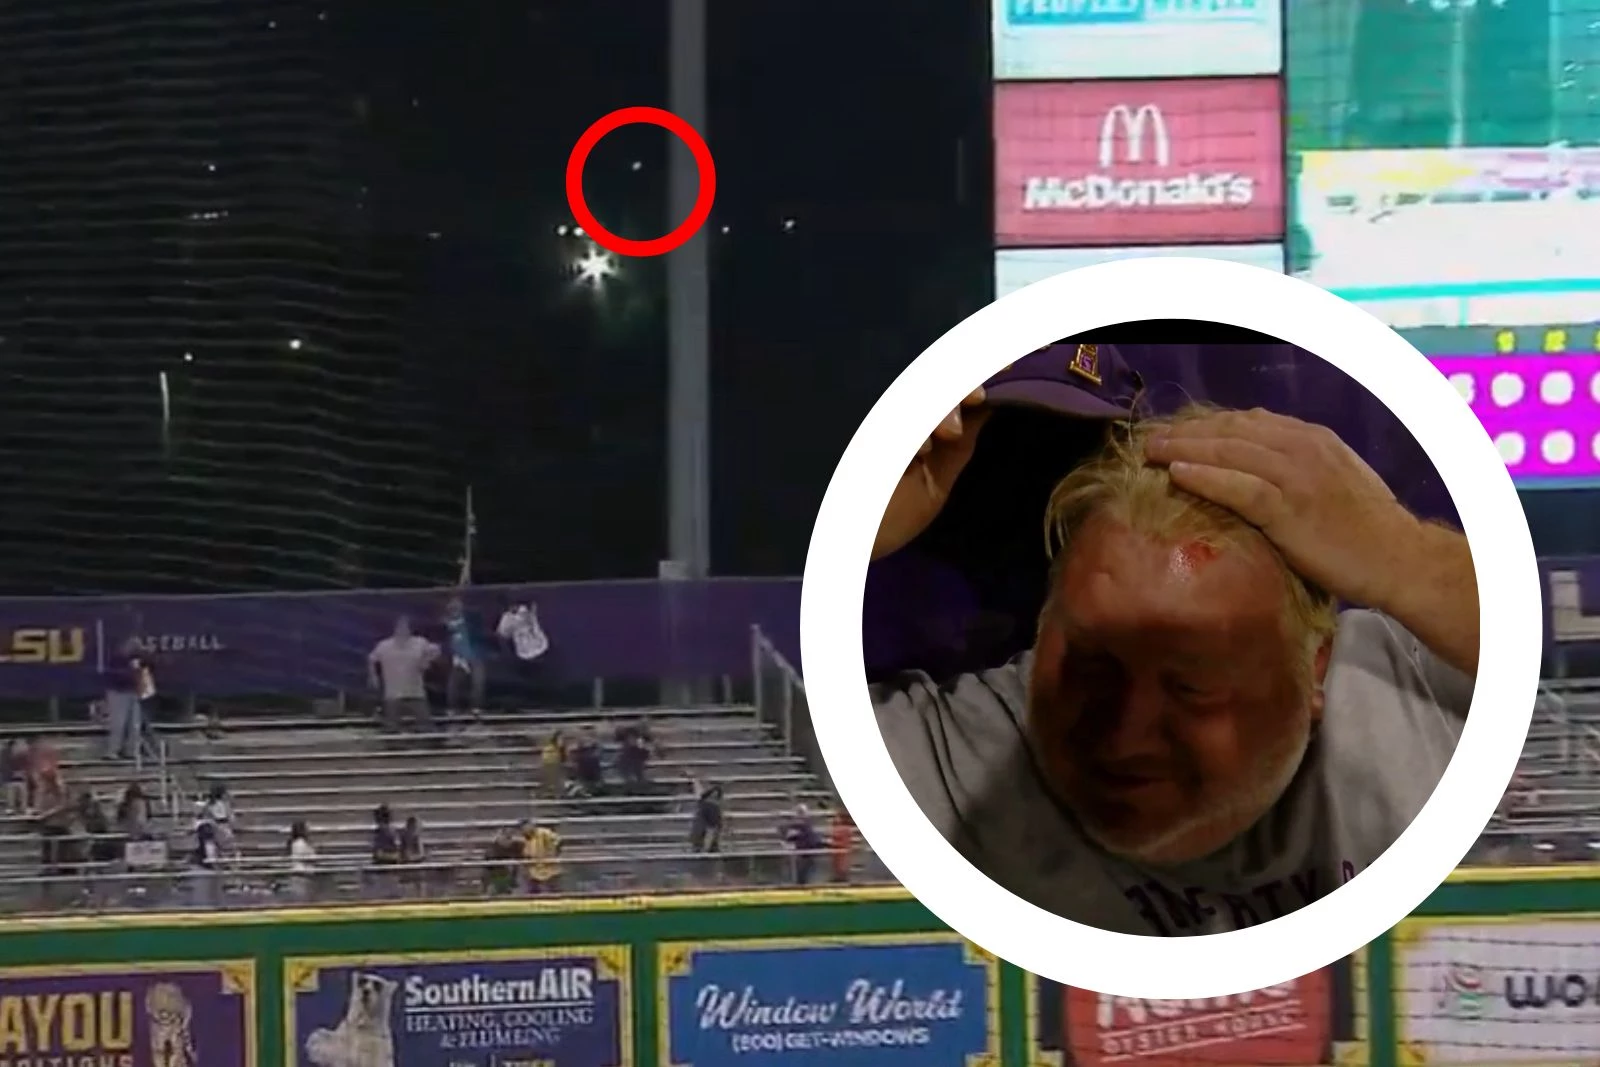 Baseball Fan Gets Blasted in the Head Trying to Catch Home Run